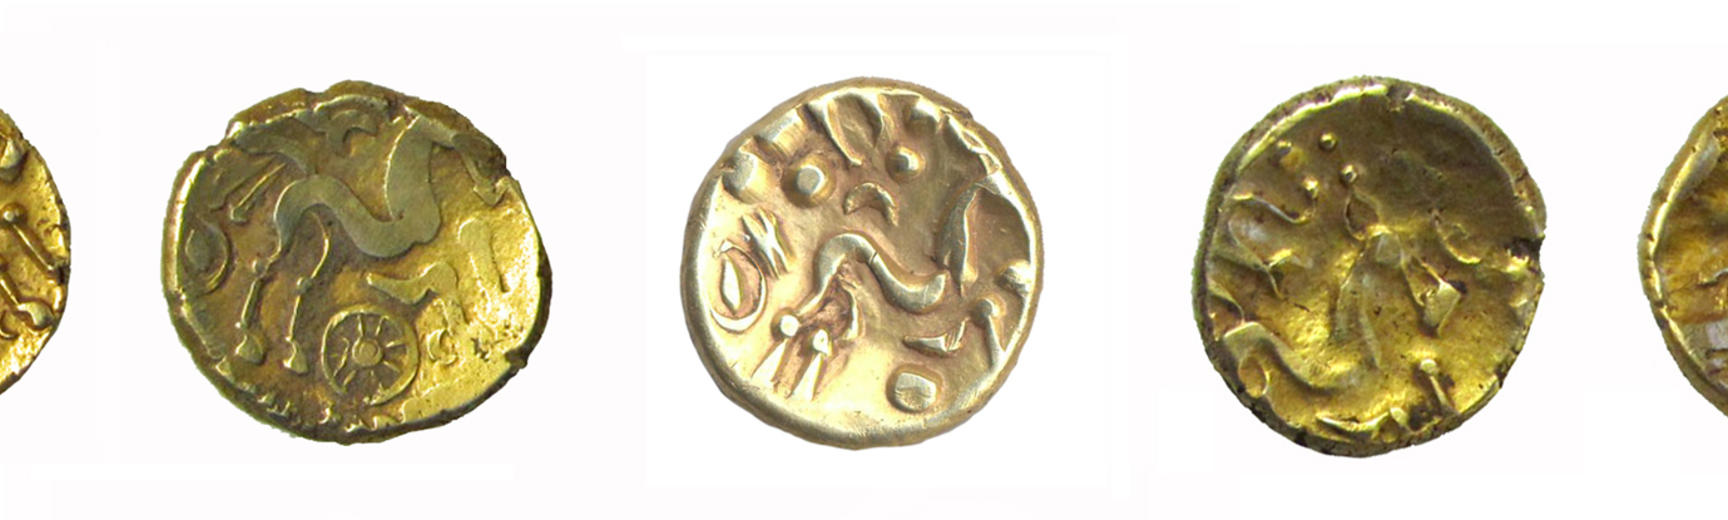 Photo of five gold coins